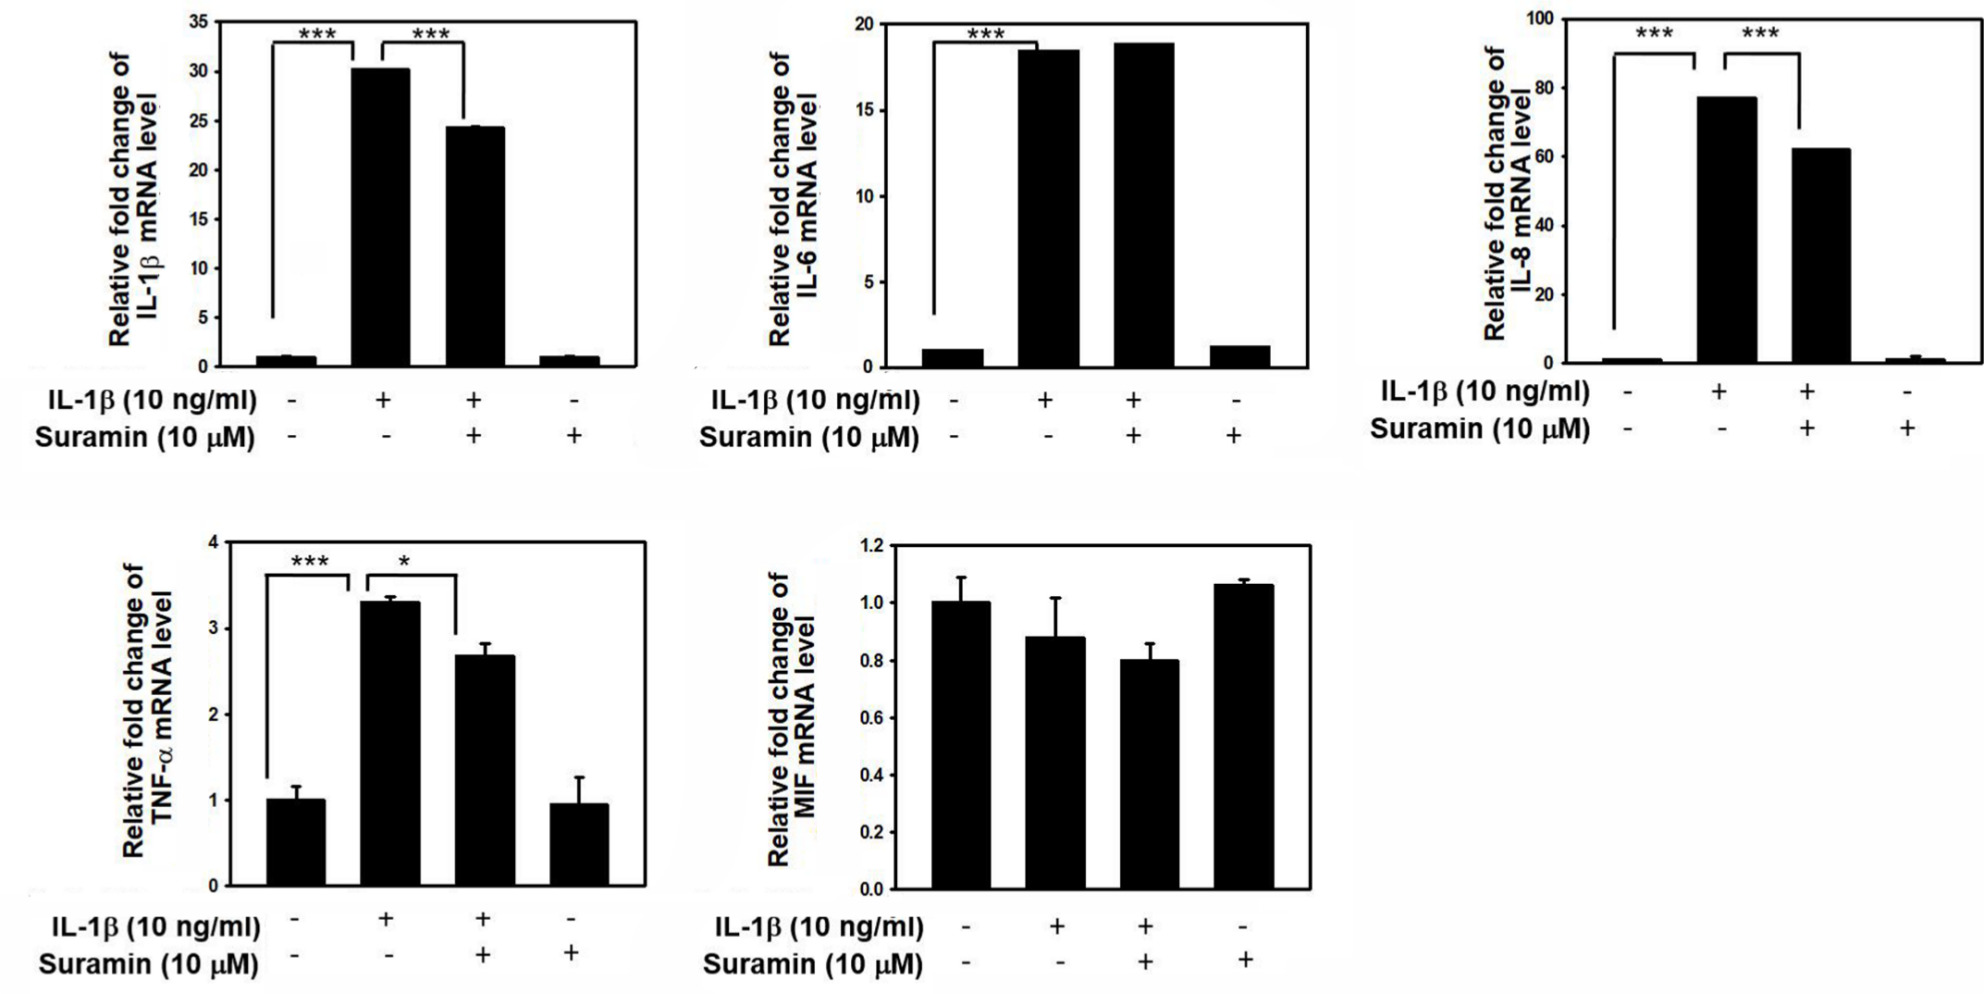 Fig. 6 
            Effect of suramin on interleukin (IL)-1β-induced proinflammatory cytokines production. The nucleus pulposus (NP) cells were treated with or without 10 ng/ml IL-1β for 24 hours, following pretreatment with vehicle or suramin for 10 μM suramin for 24 hours. Total RNA were extracted for real-time polymerase chain reaction analysis of IL-1β, IL-6, IL-8, tumour necrosis factor alpha (TNF-α), and macrophage migration inhibitory-1 (MIF) messenger RNA (mRNA) expression. *p < 0.05, ***p < 0.001. All data are shown as the mean and standard deviation (n = 3 to 5), and were analyzed by independent-samples t-test.
          